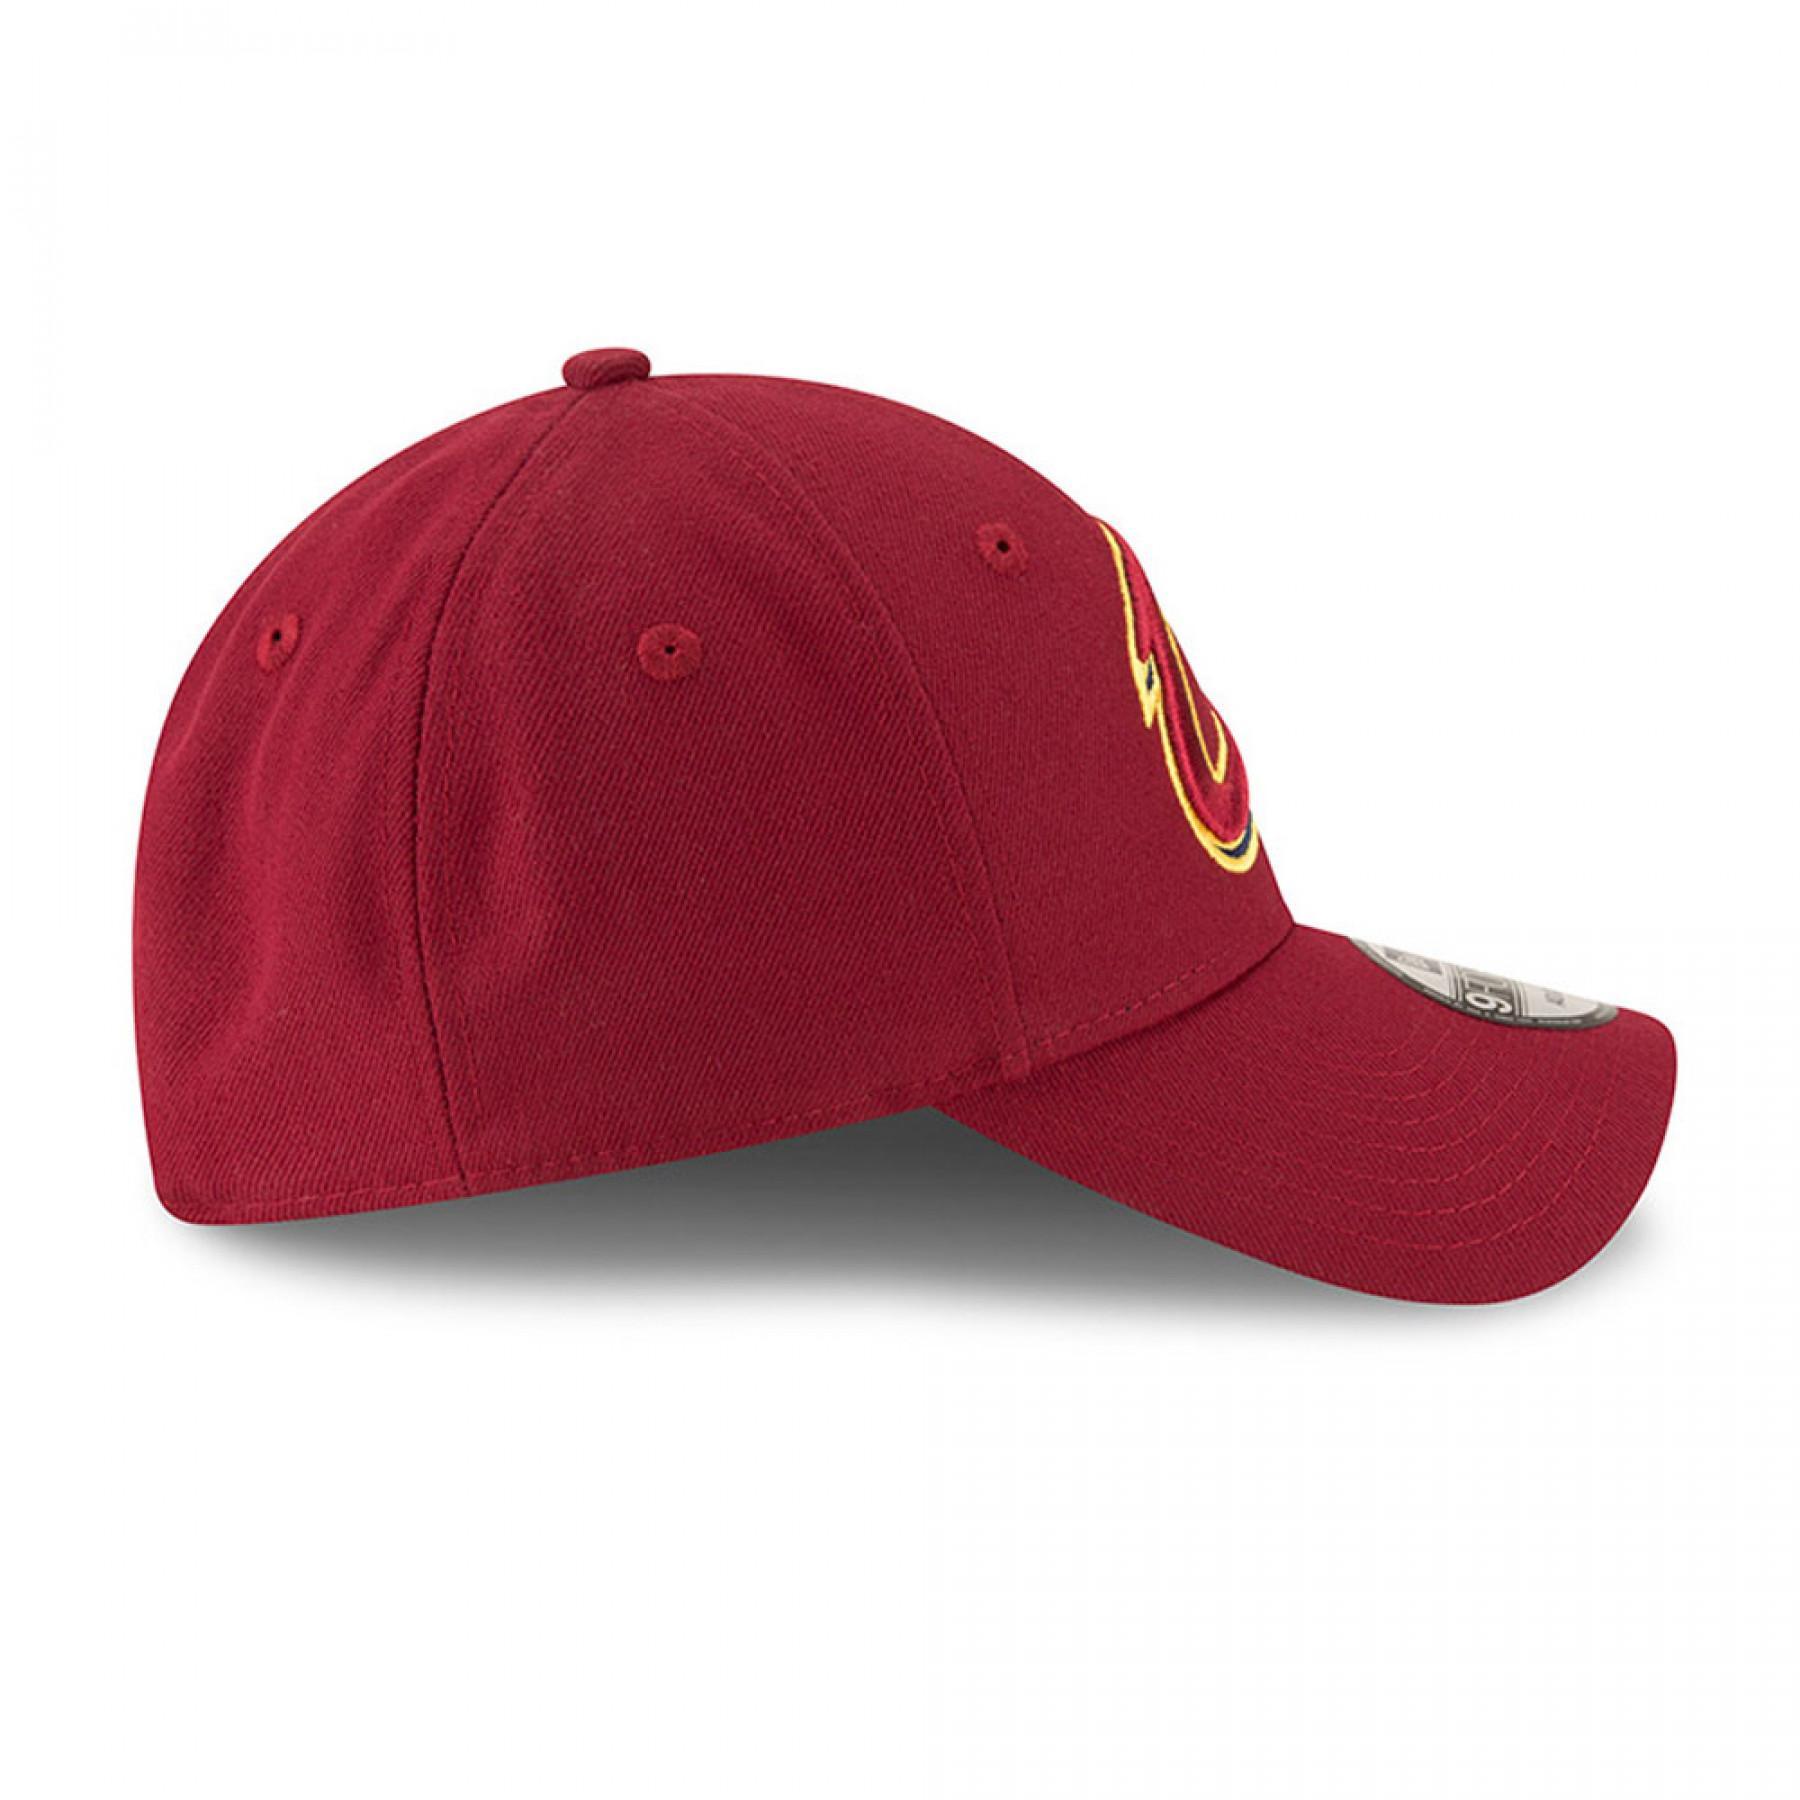 Kappe New Era 9FORTY The League Cleveland Cavaliers